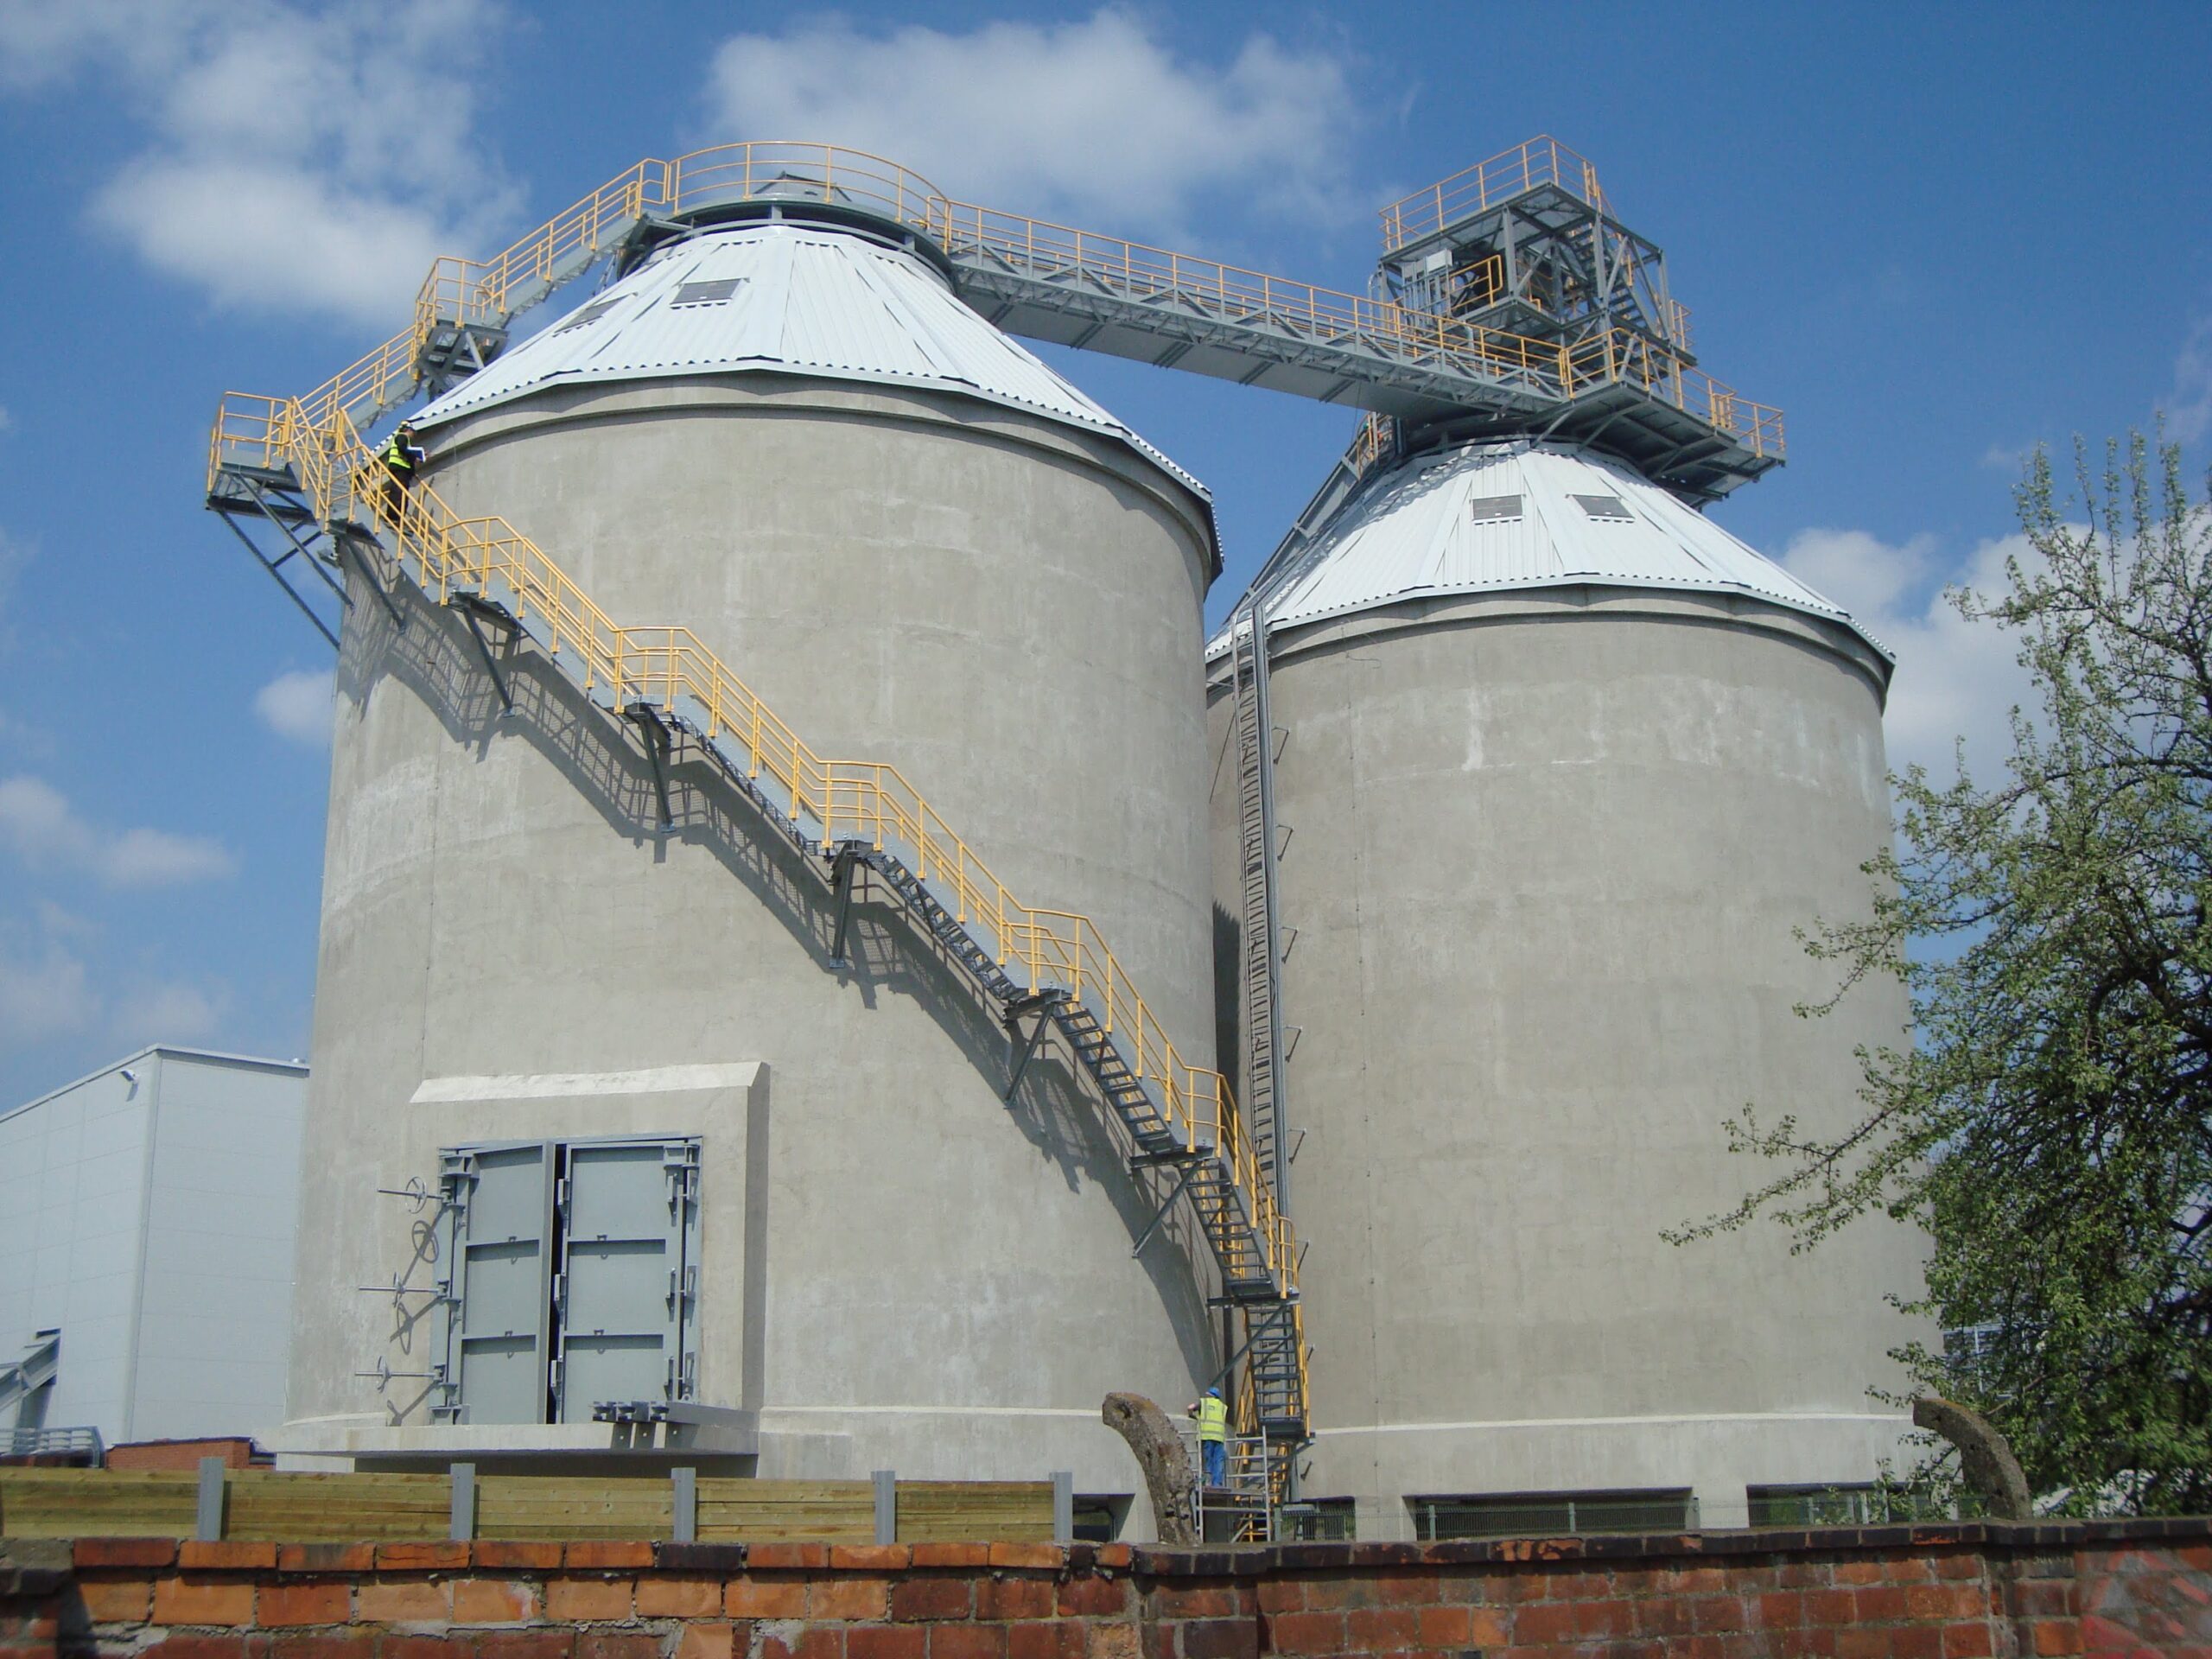 FMW Round-Silo discharge system with two round silos for storing wood chips